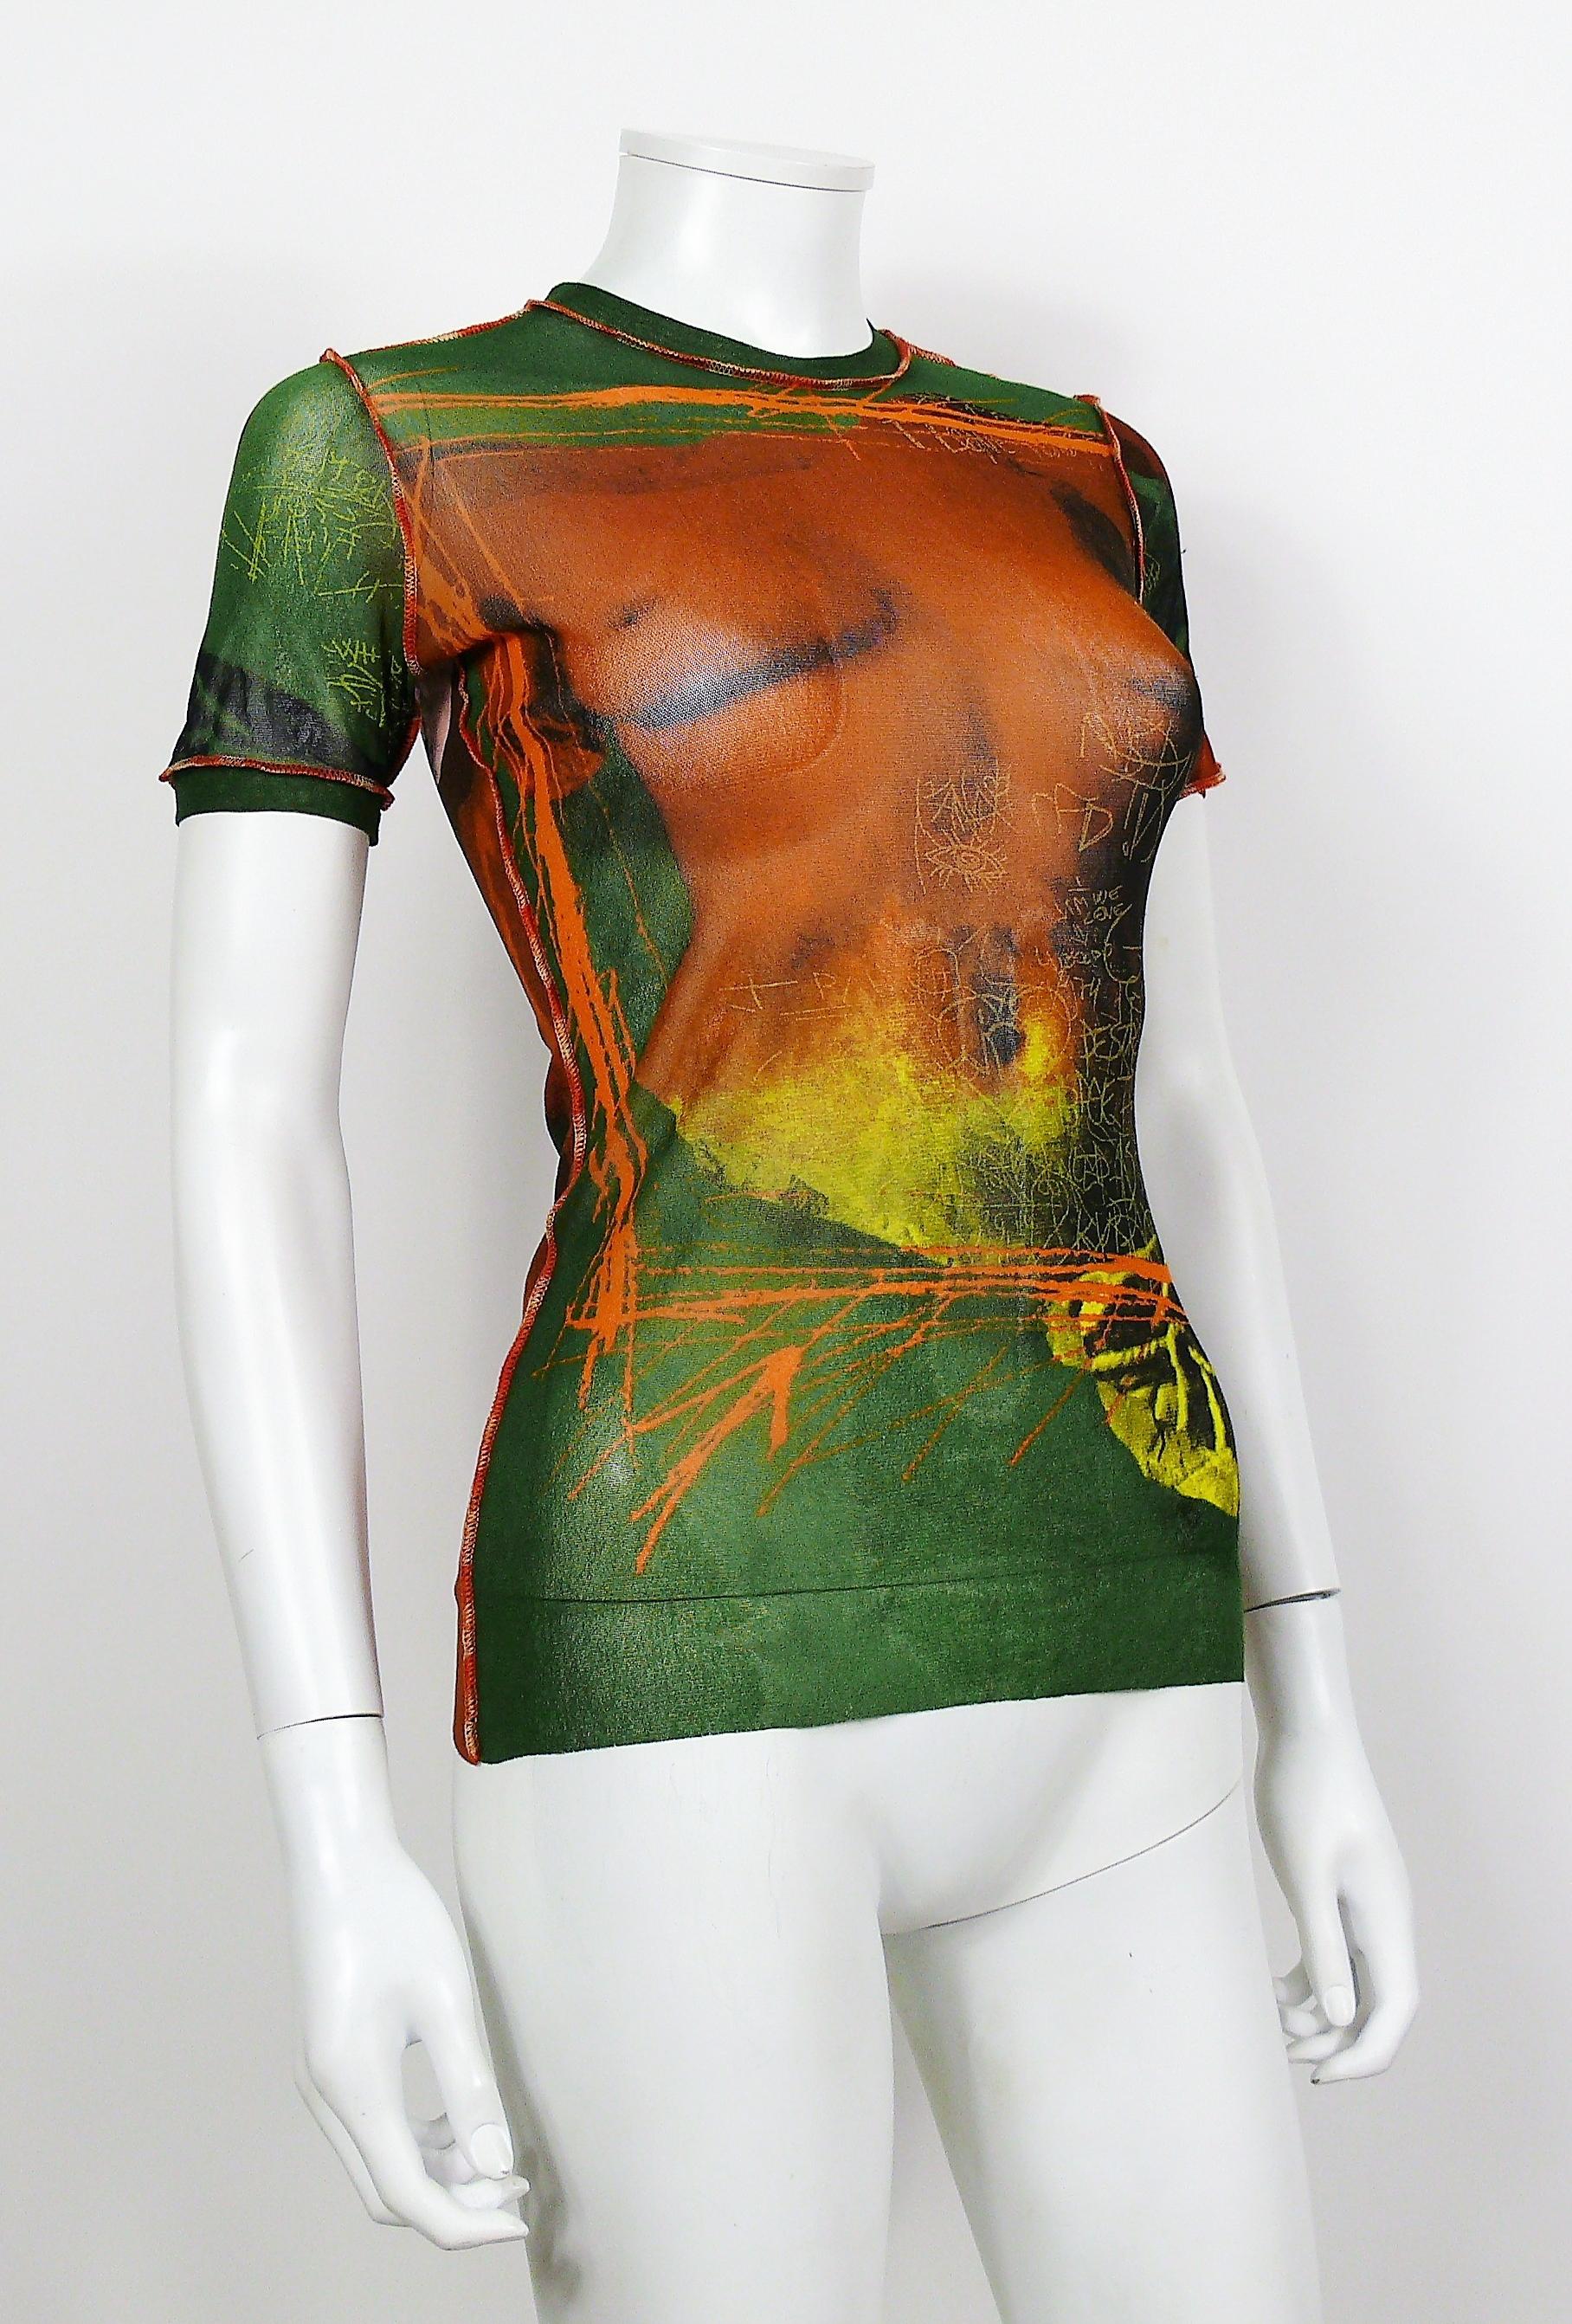 JEAN PAUL GAULTIER vintage Venus de Milo sheer mesh top featuring graffitis.

Label reads JEAN PAUL GAULTIER Maille.
Made in Italy.

Size label reads : S.
Please refer to measurements.

Missing composition tag (probably 100% Nylon).

Indicative